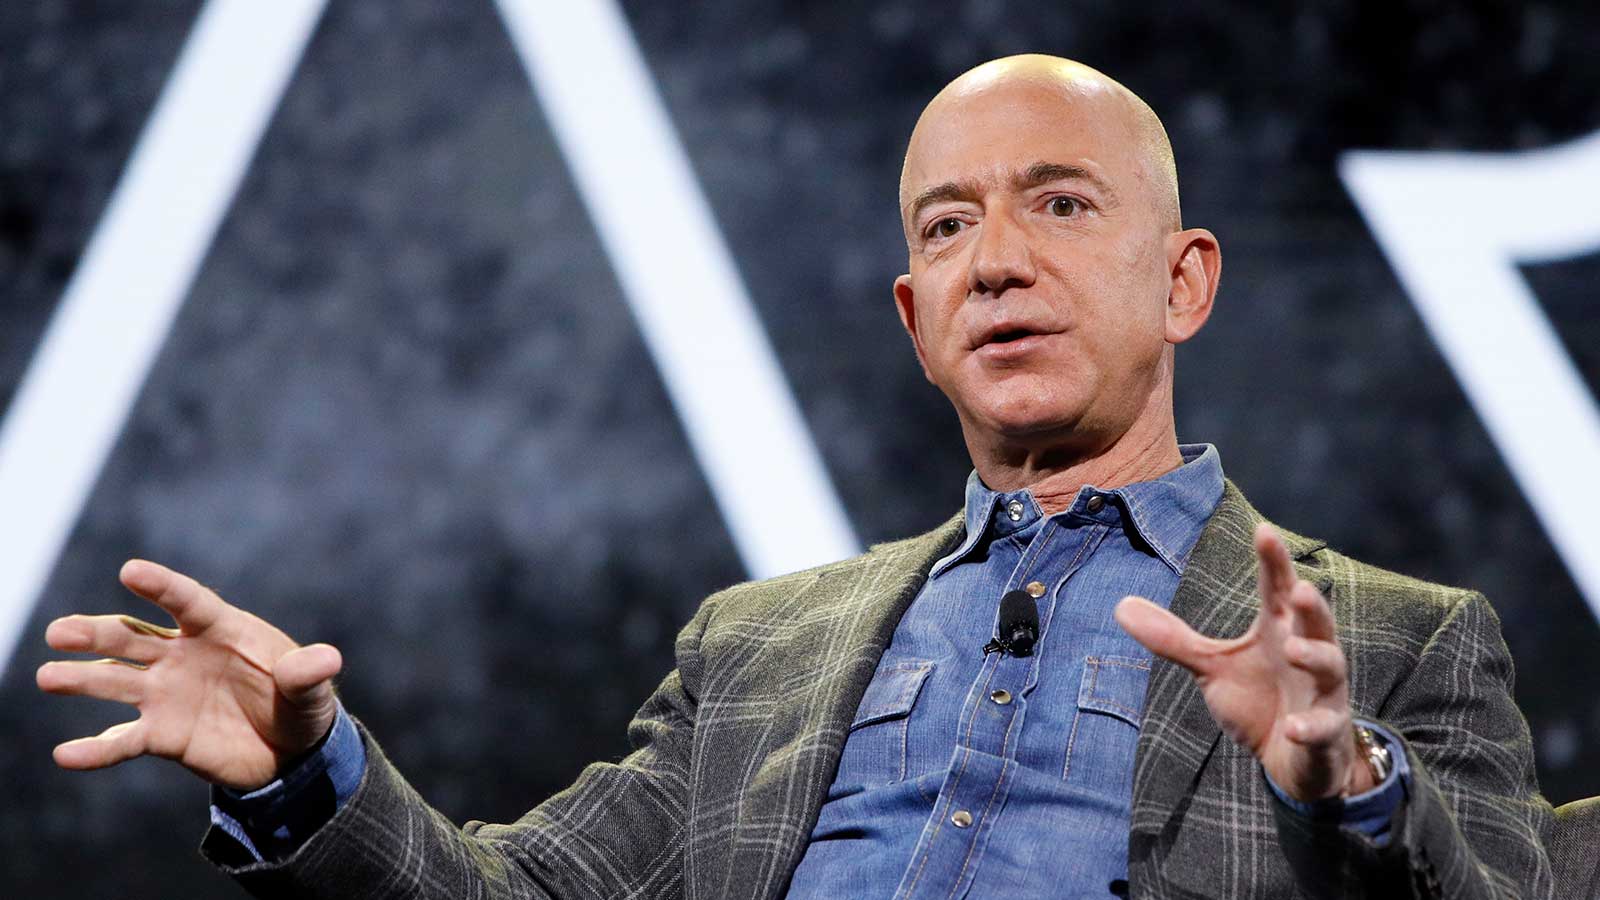 IRS records show wealthiest Americans, including Bezos and Musk, paid little in income taxes as share of wealth, report says